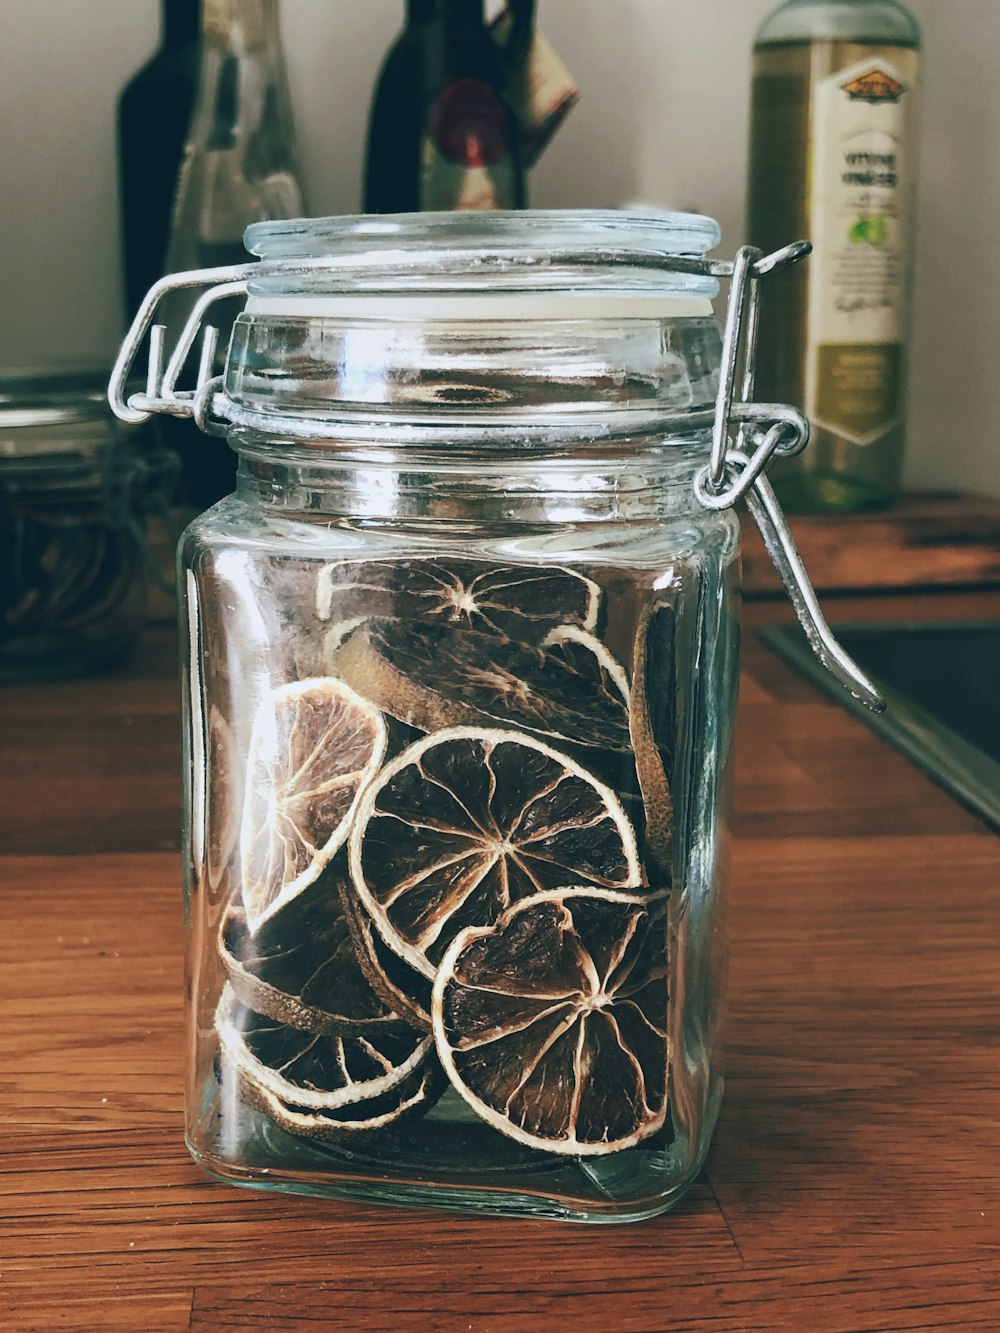 clear glass jar on brown wooden table